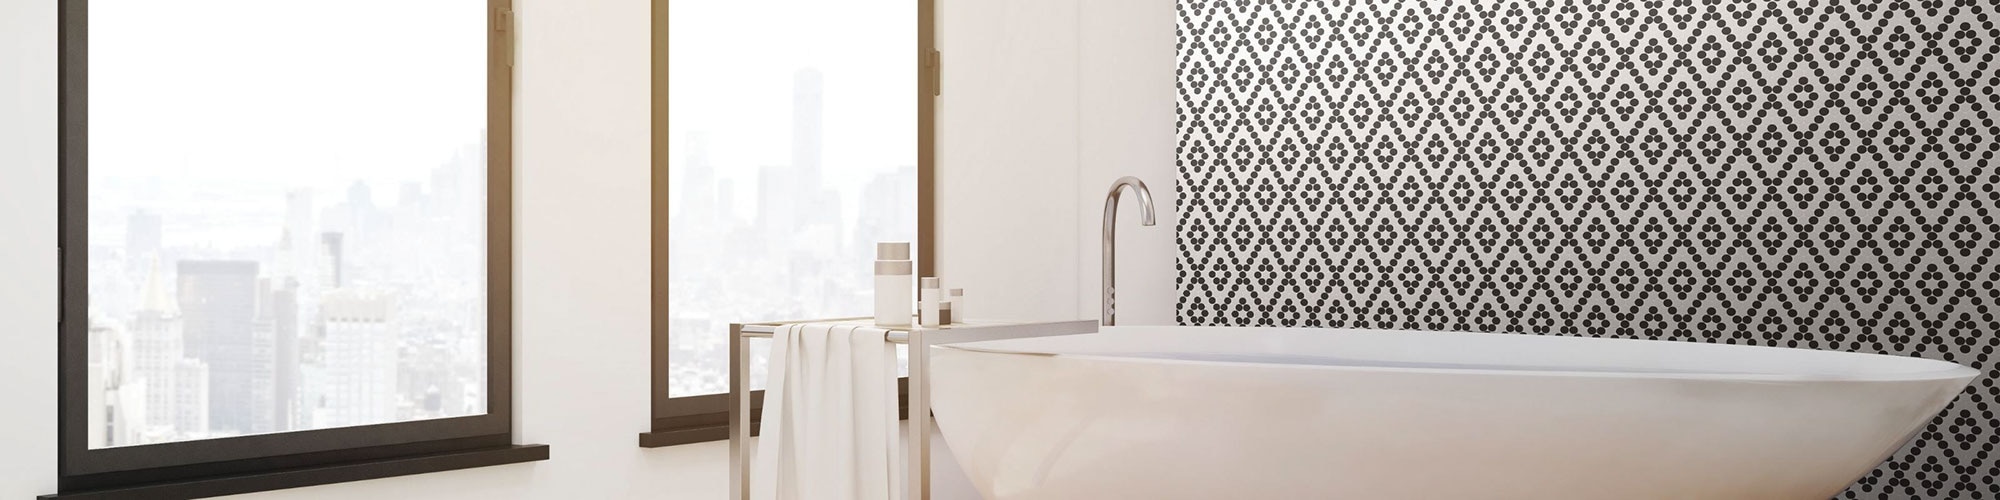 White, long soaker bathtub in front of a large picture window and black & white mosaic feature wall.